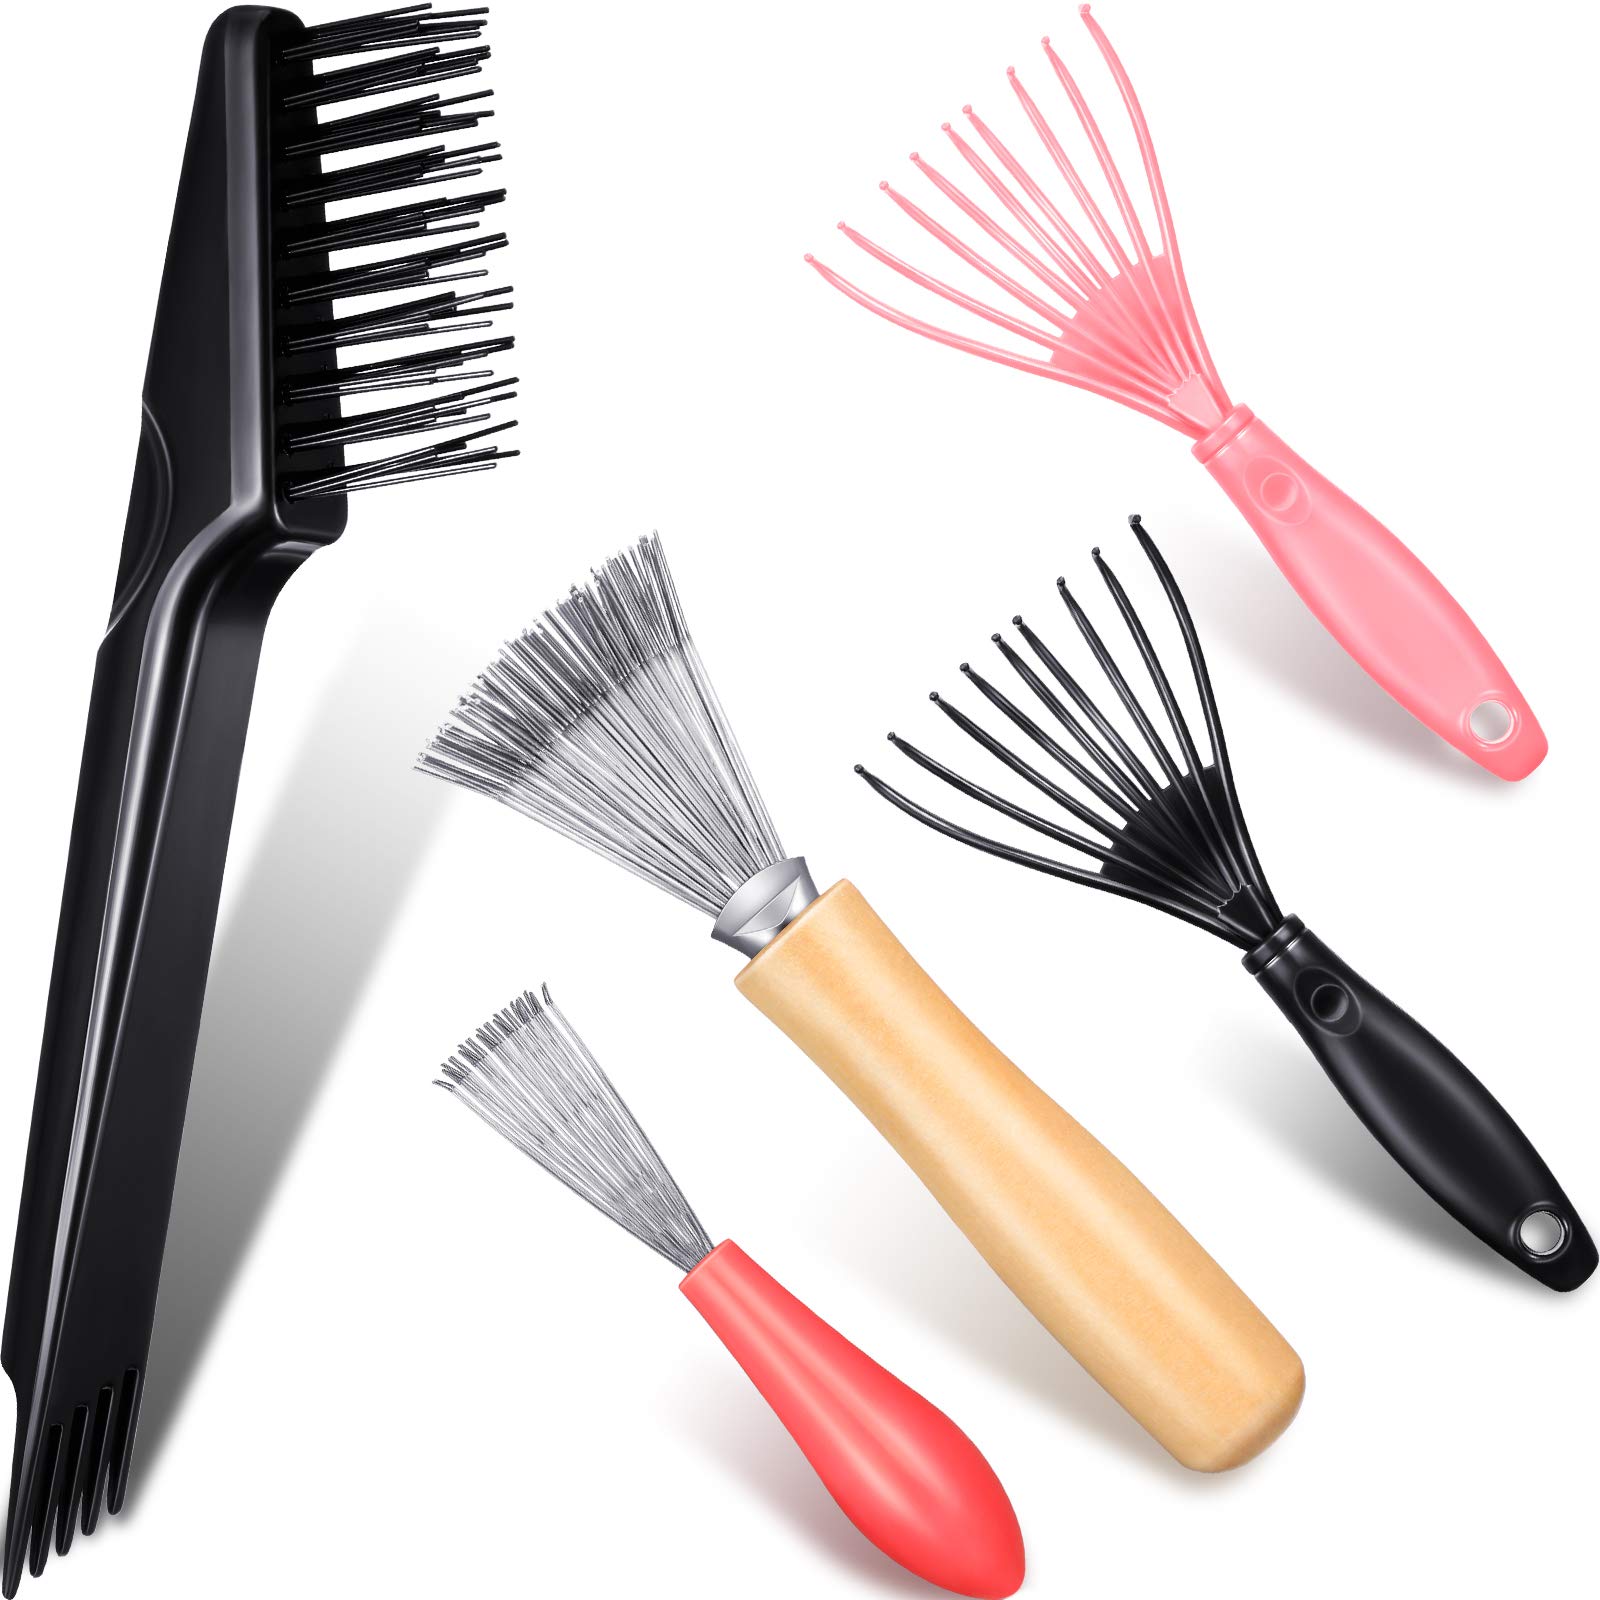  2 Pieces Hair Brush Cleaning Tool Comb Cleaner Brush Mini Hair  Brush Remover for Removing Hair Dust Home and Salon Use (Plastic Handle  Rake, Pink and Black) : Beauty 